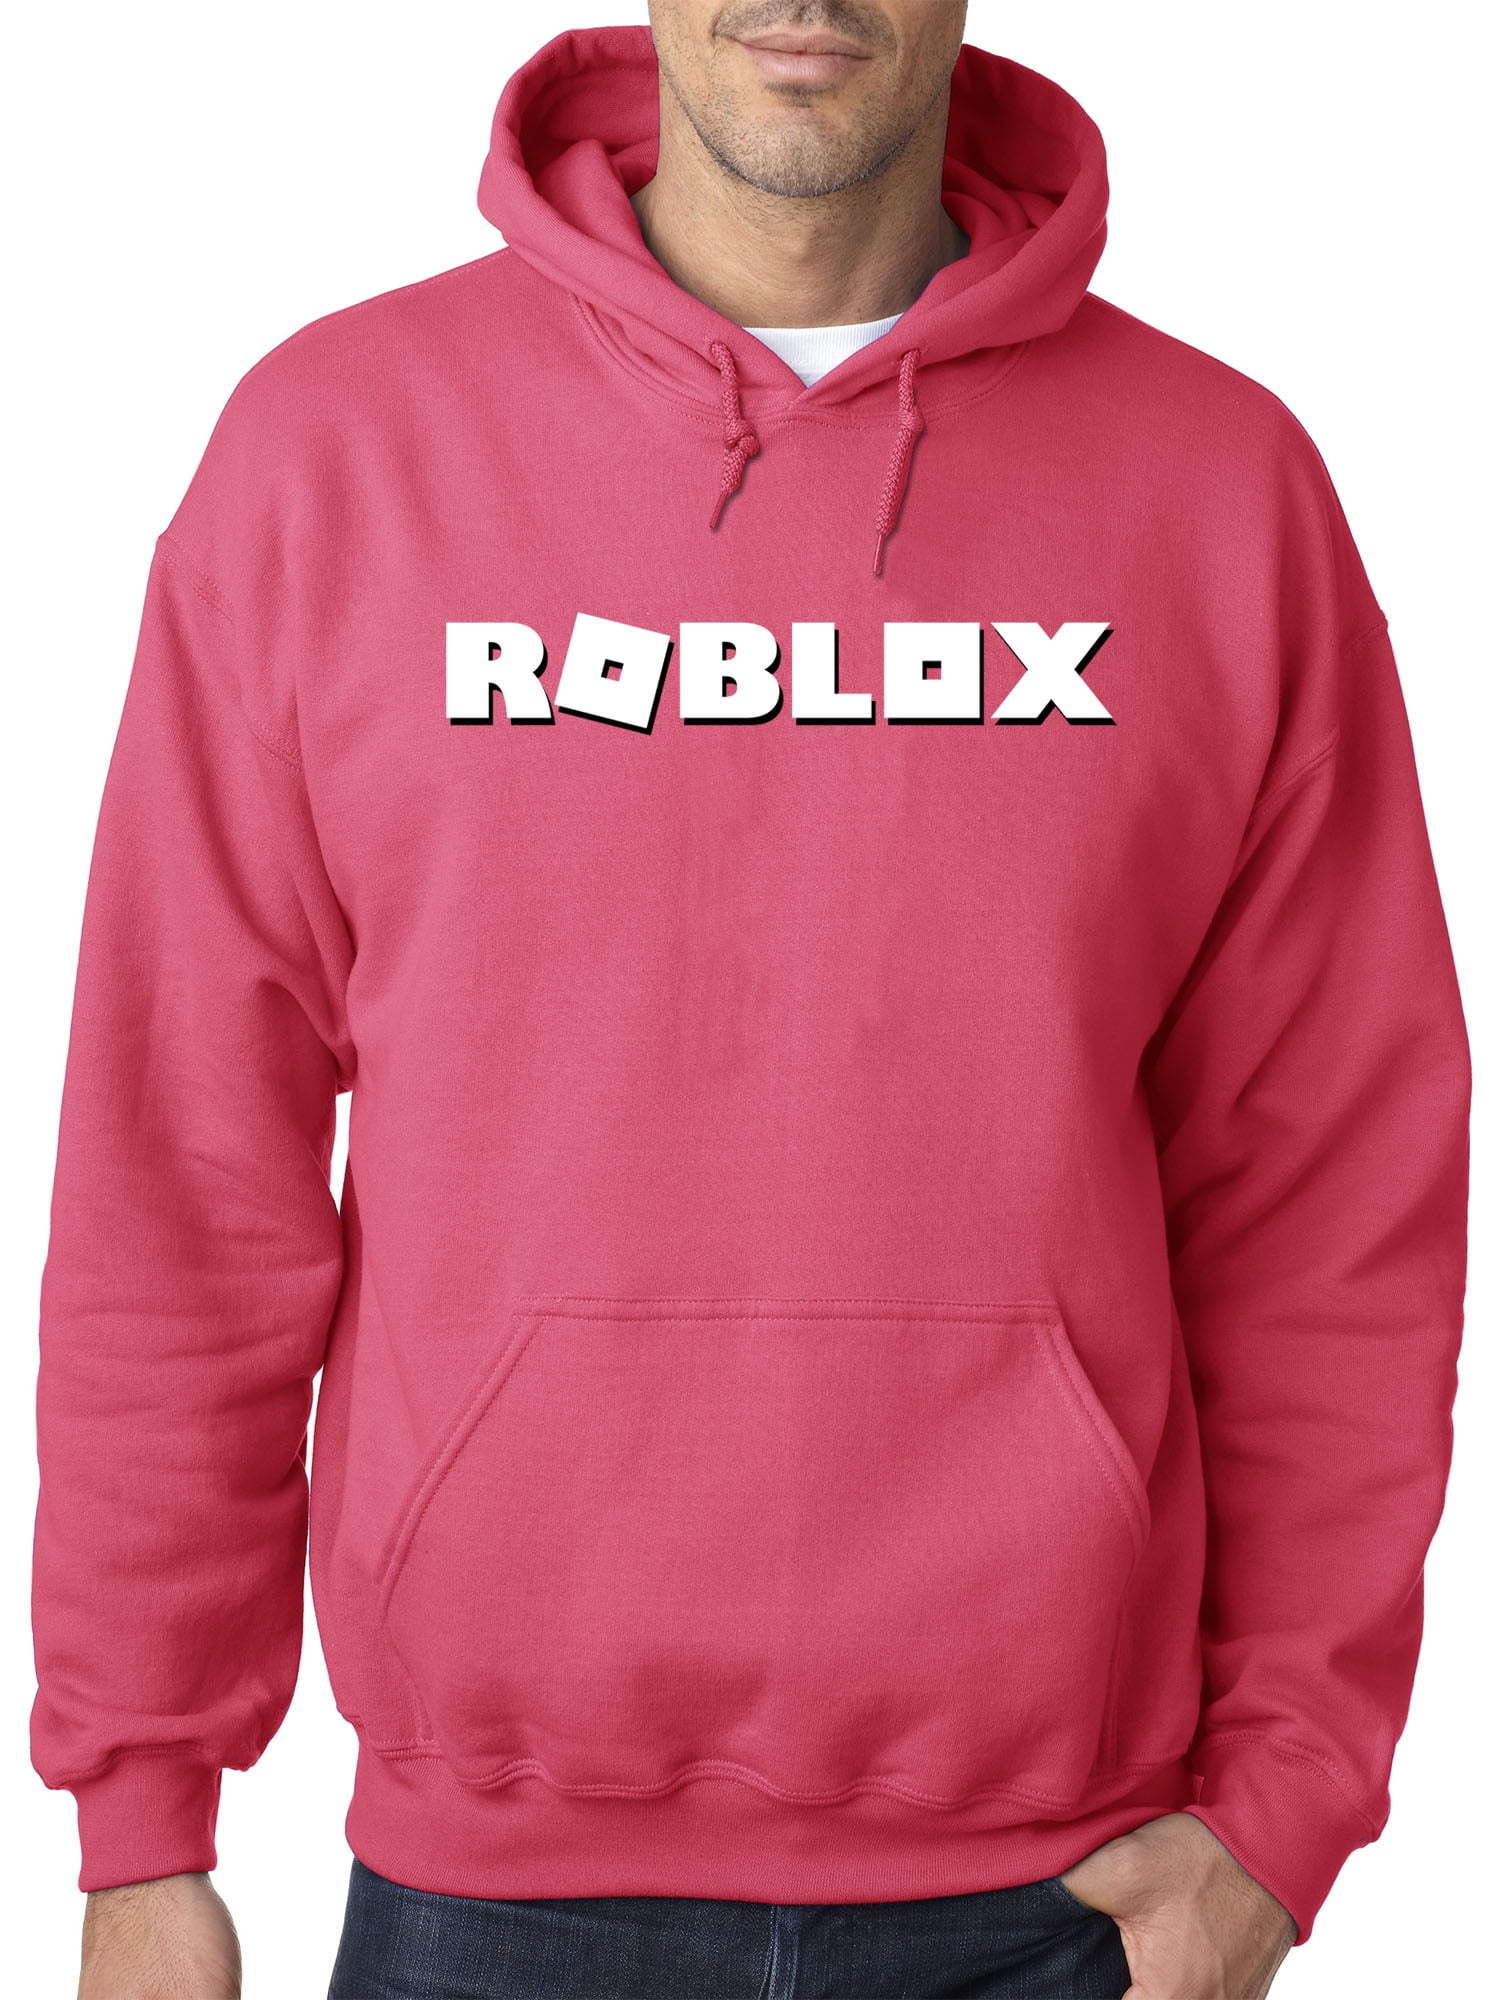 Trendy Usa Trendy Usa 923 Adult Hoodie Roblox Logo Game Accent Sweatshirt Medium Heliconia Walmart Com - red hoodie with headphones roblox red hoodie red shirt